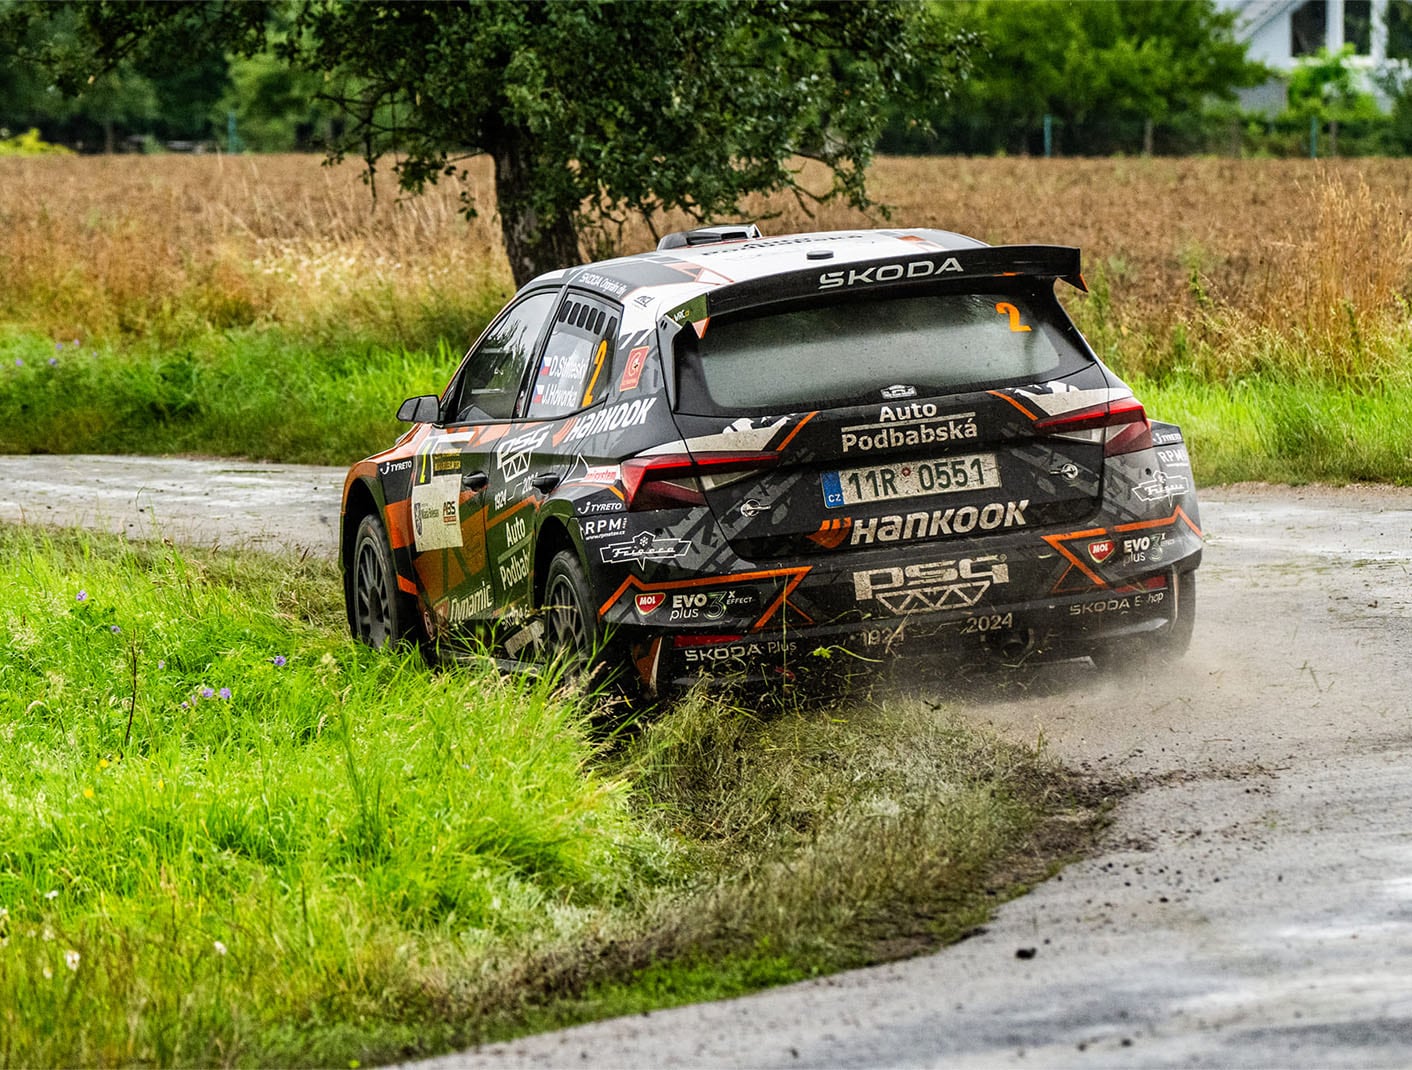 Drivers sponsored by Hankook Tire win first and second prizes at the 50th Bohemia Rally